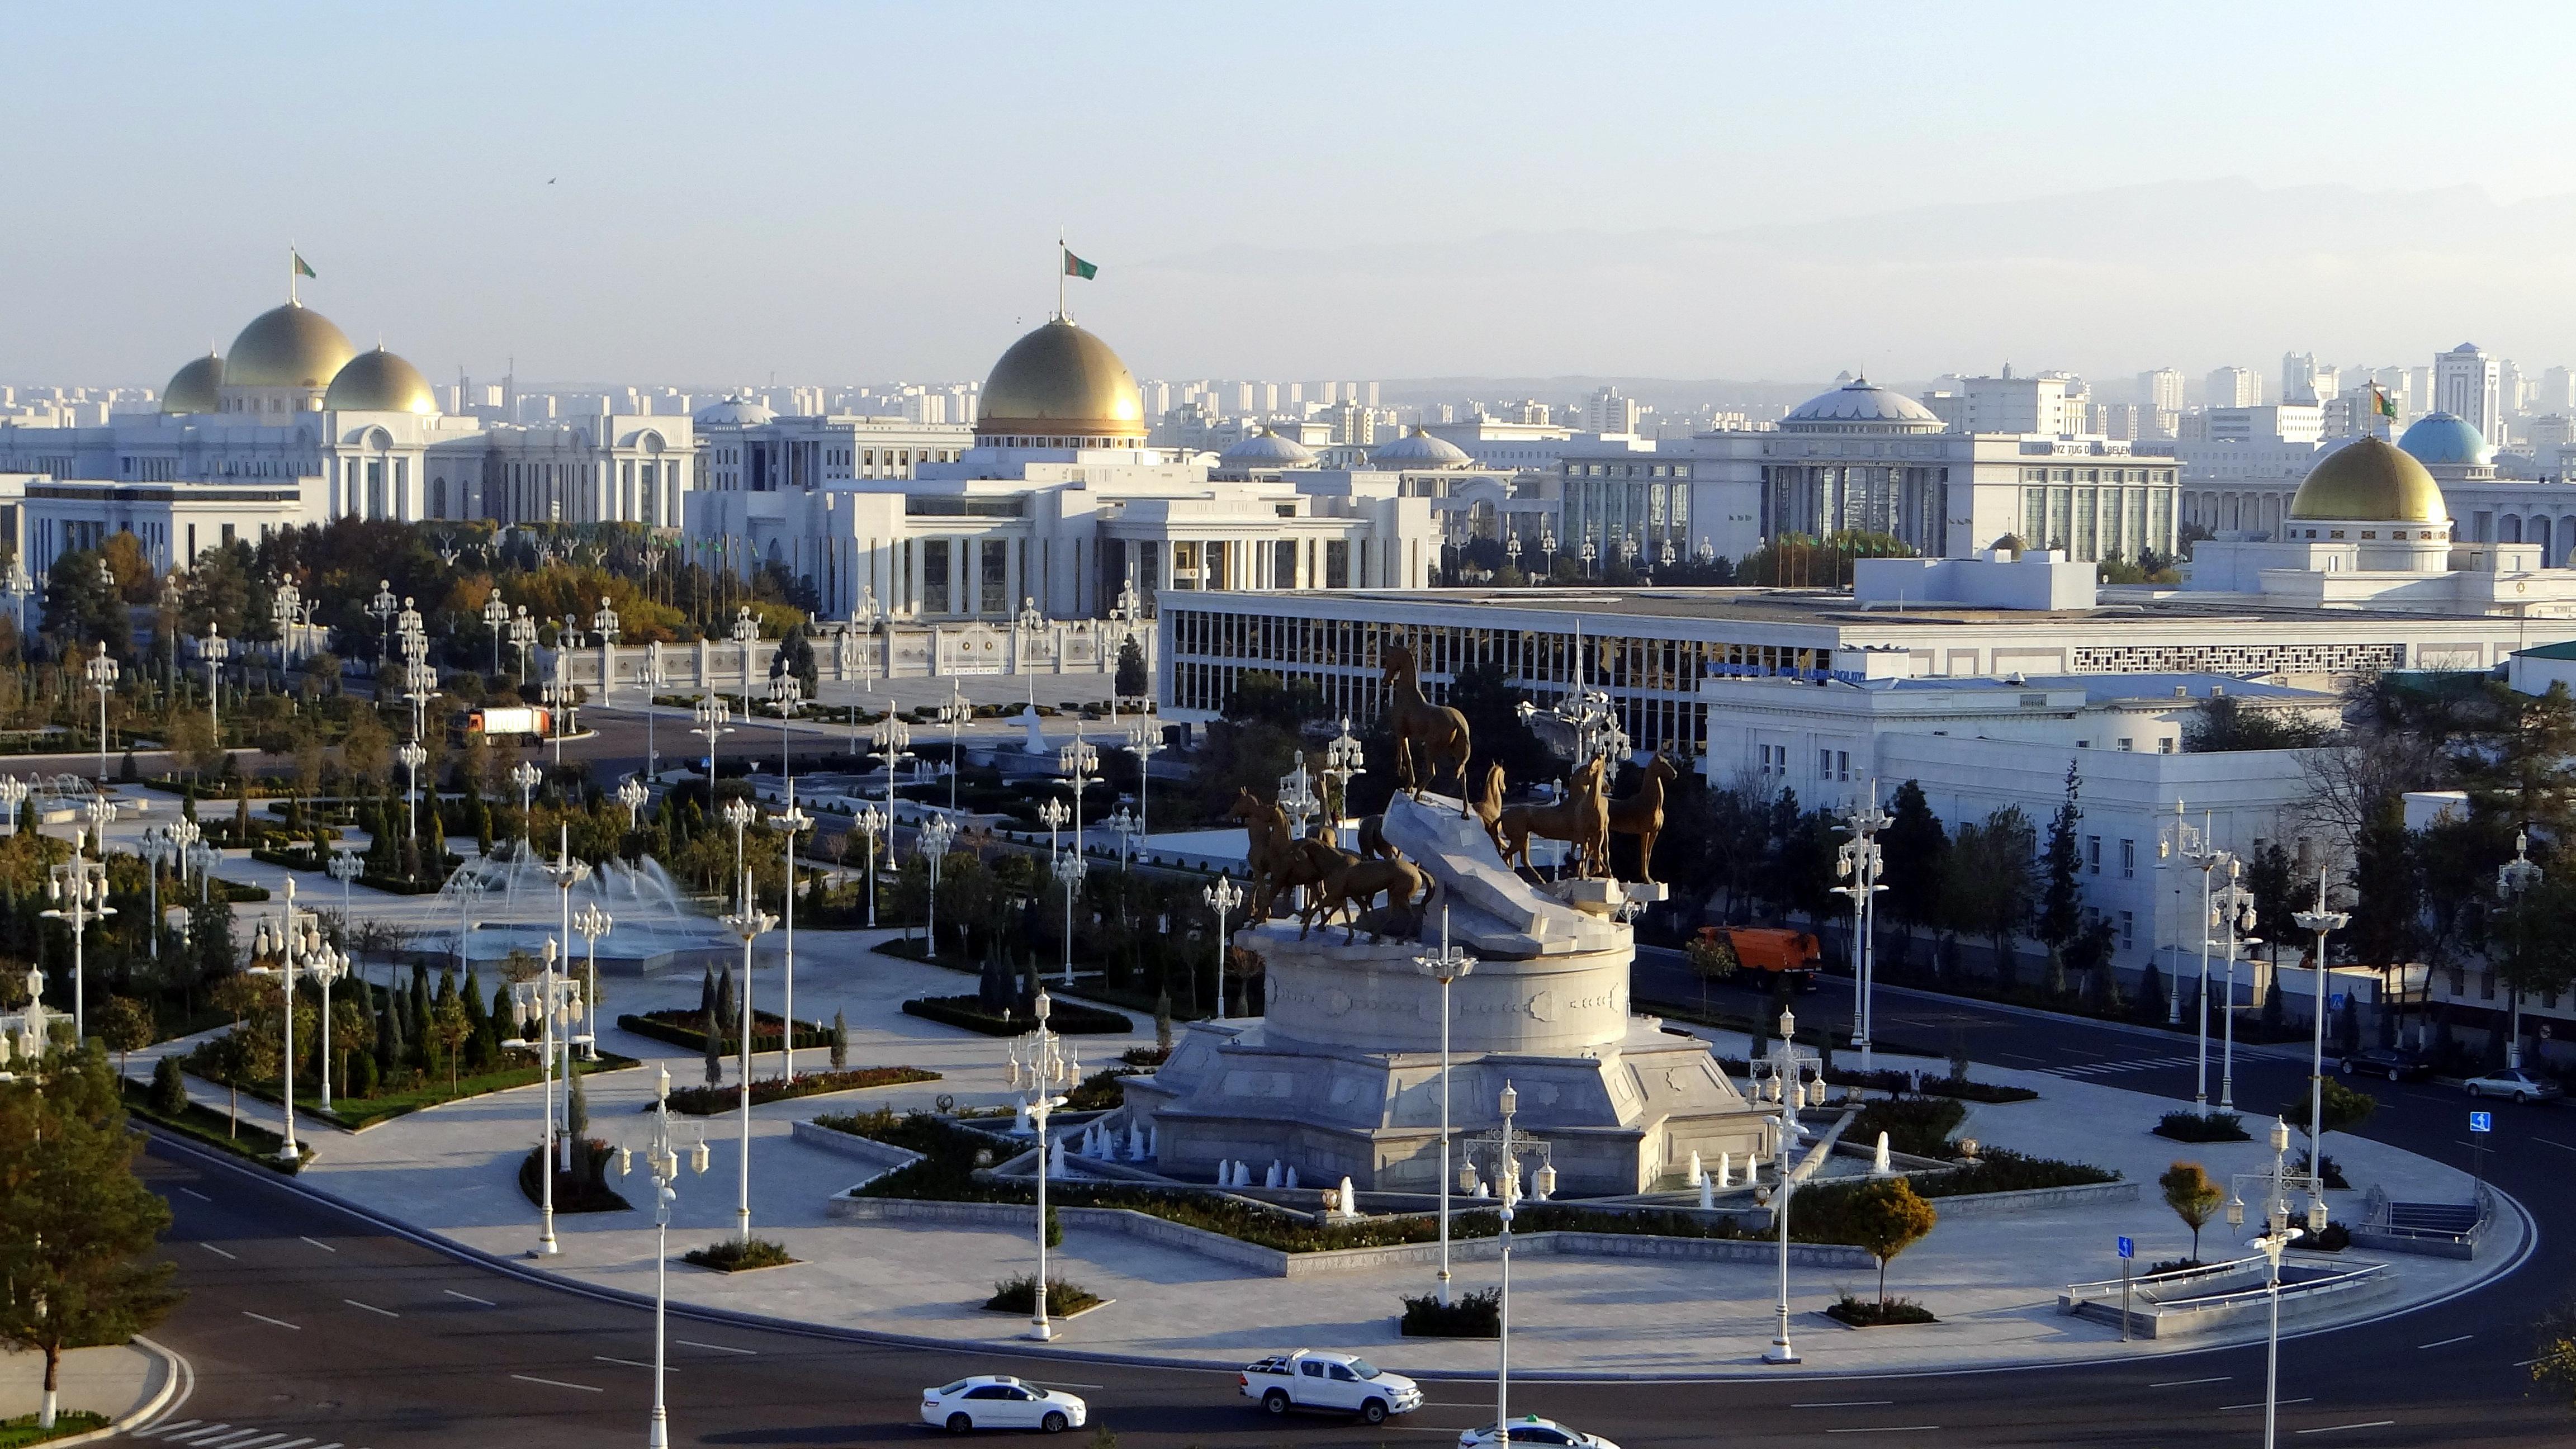 Ashgabat serves as the gateway for travelers wanting to enjoy Nisa and other prominent sites of Turkmenistan. © gonetothemoon / Shutterstock